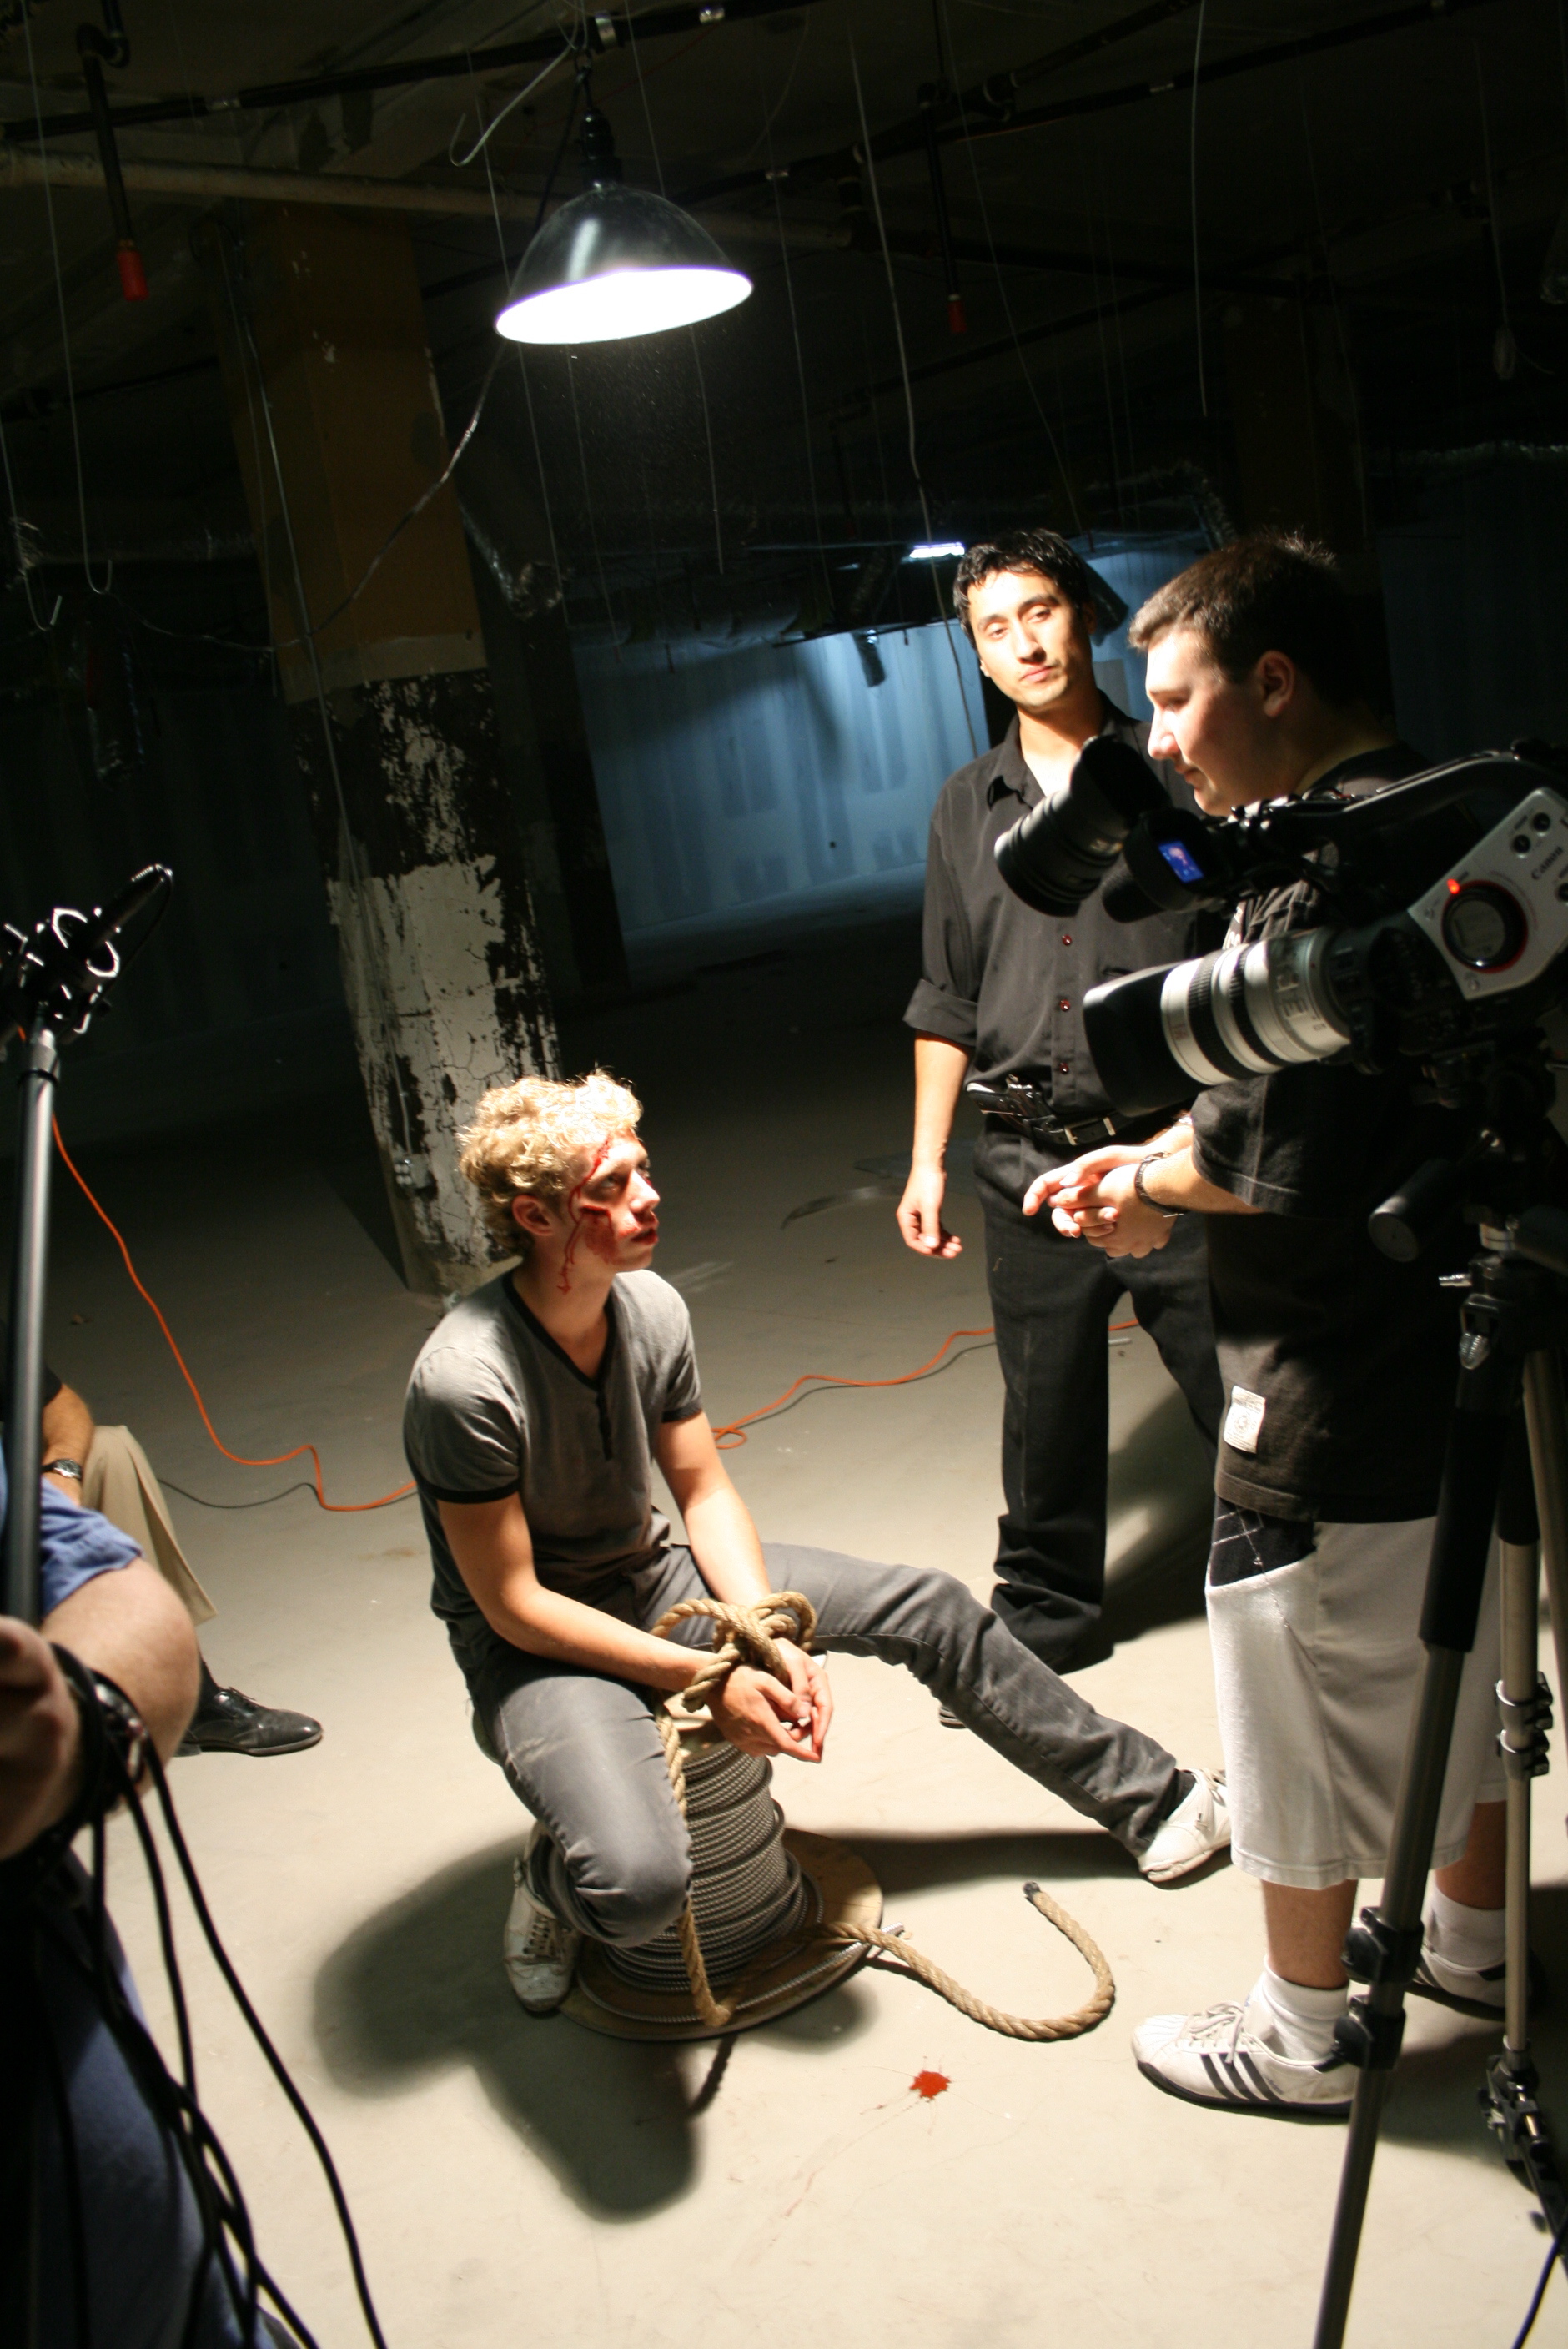 On set of Dark Eyes(2010). From left to right: Fabien Soudiere, Dragos Berg and Michael Aloyan.